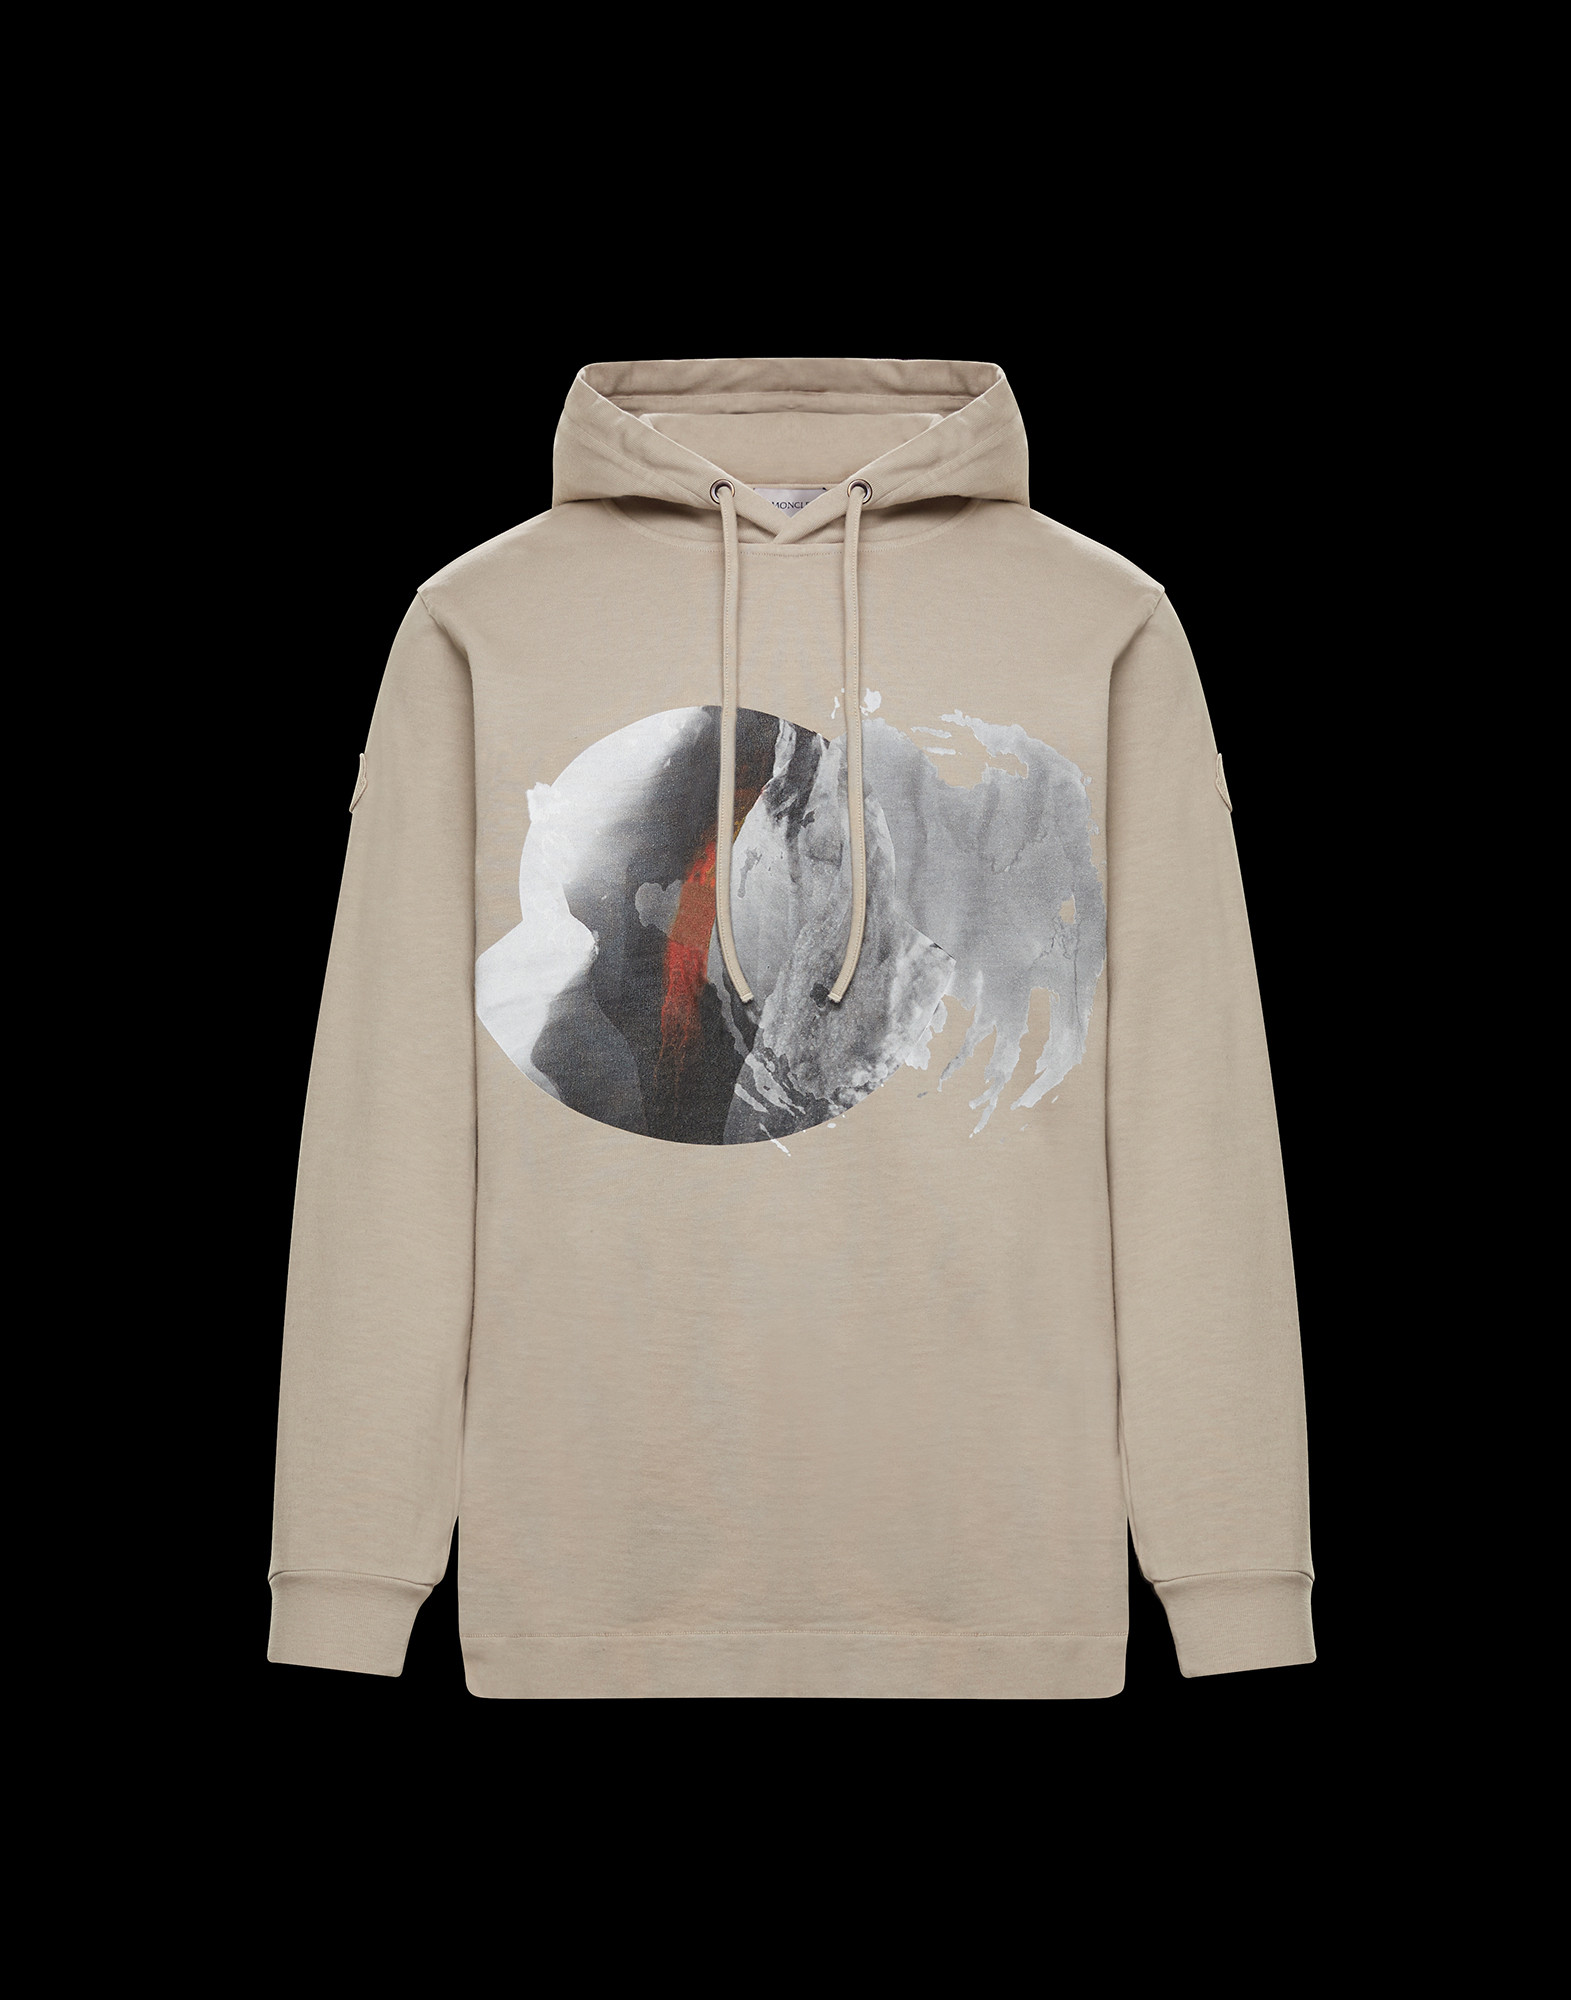 Moncler SWEATSHIRT for Unisex, HOODED SWEATSHIRTS | Official Online Store